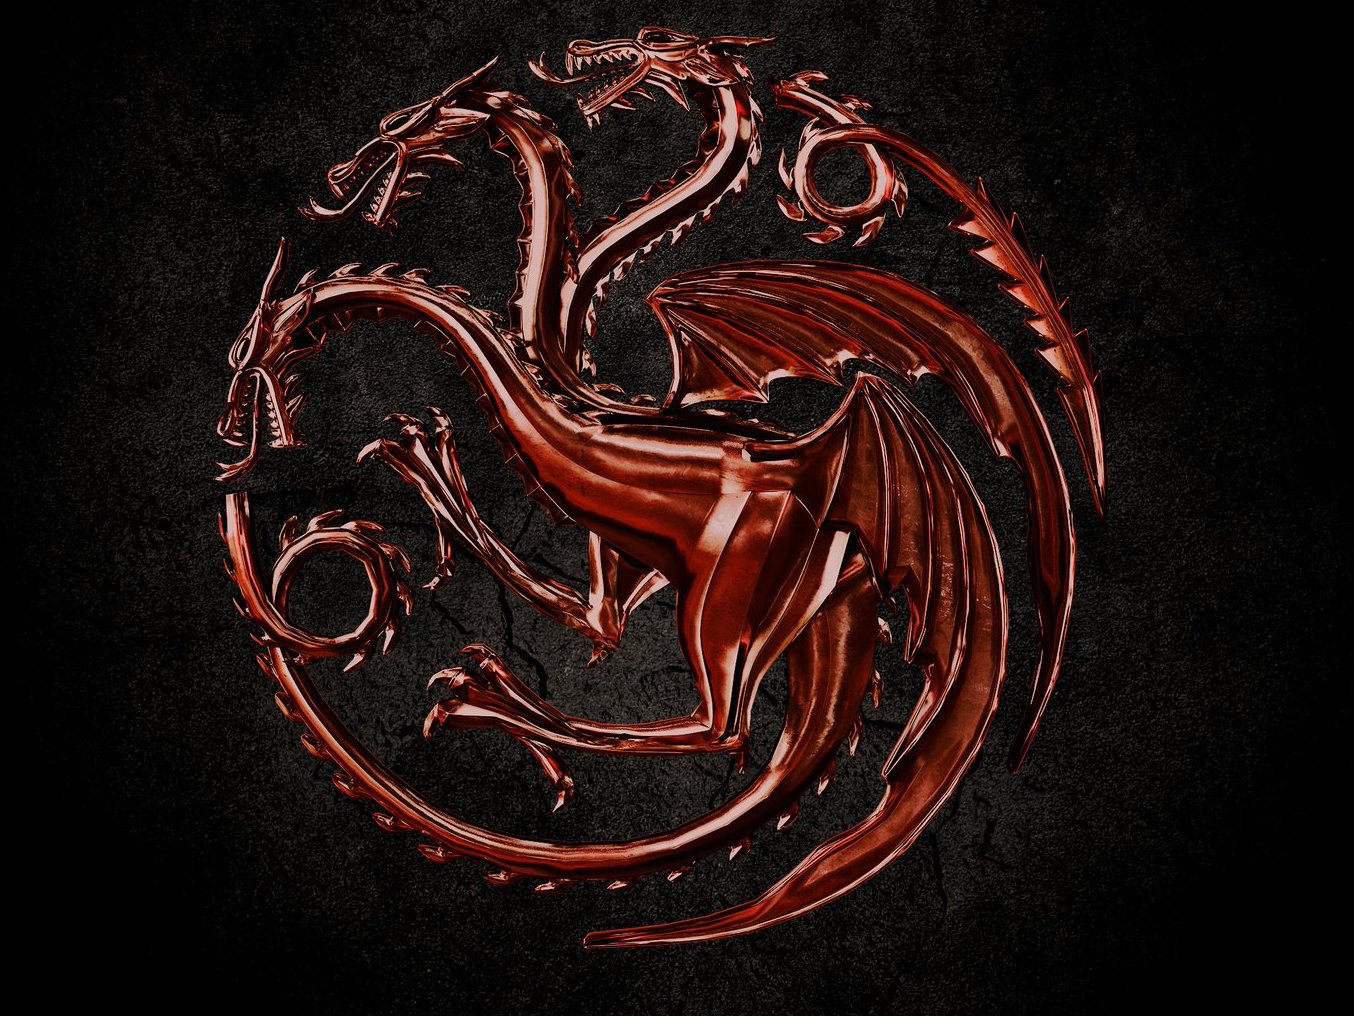 'Game of Thrones' spinoff 'House of the Dragon' releases first teaser trailer